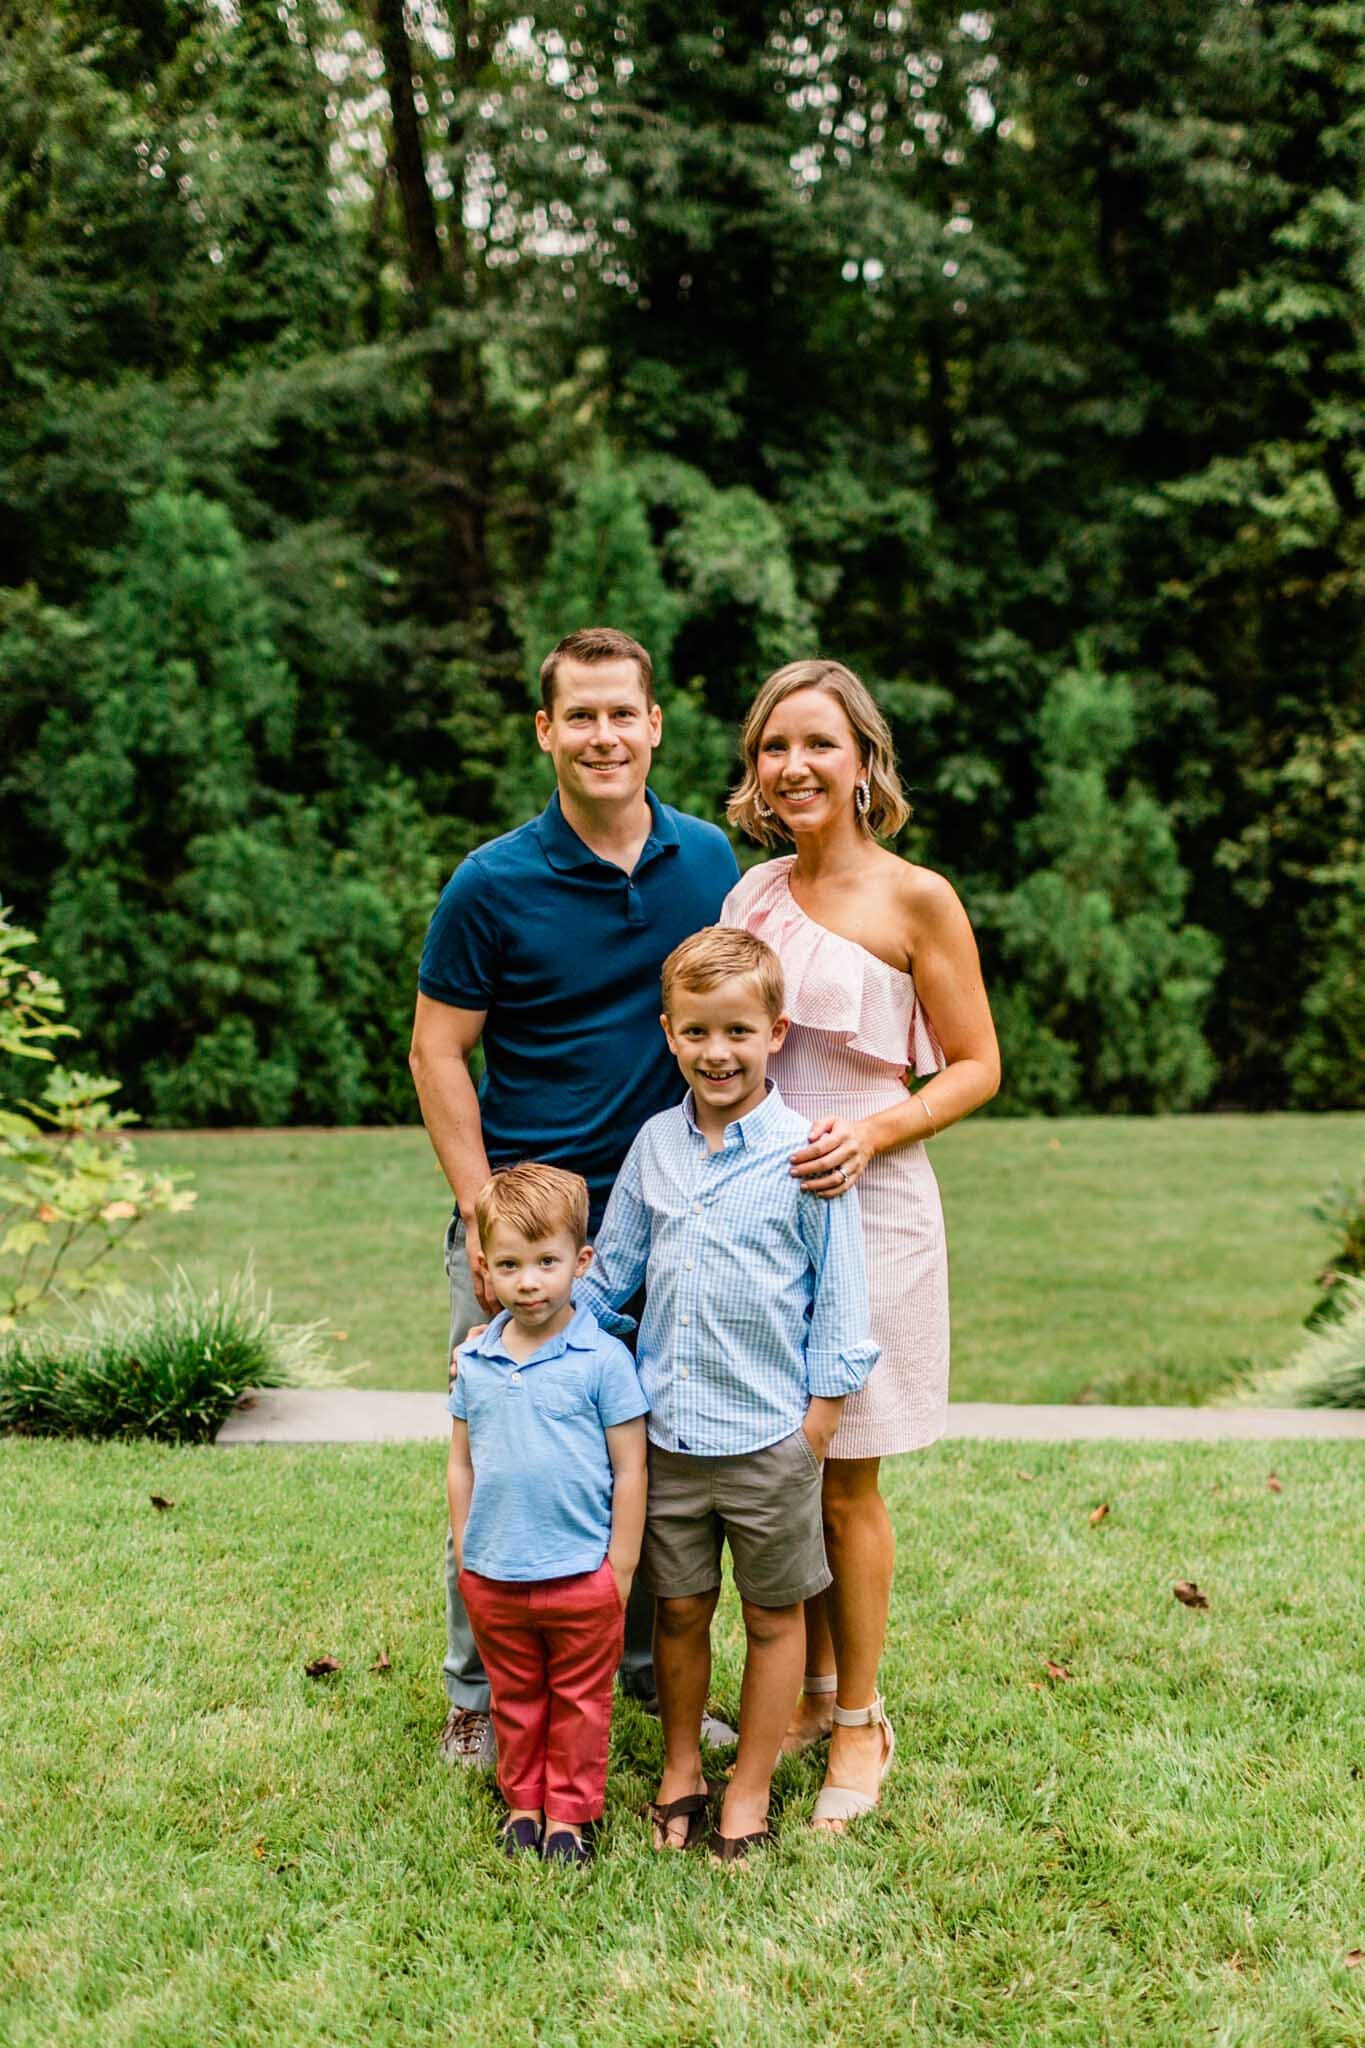 Raleigh Family Photographer | By G. Lin Photography | Summer outdoor family photo